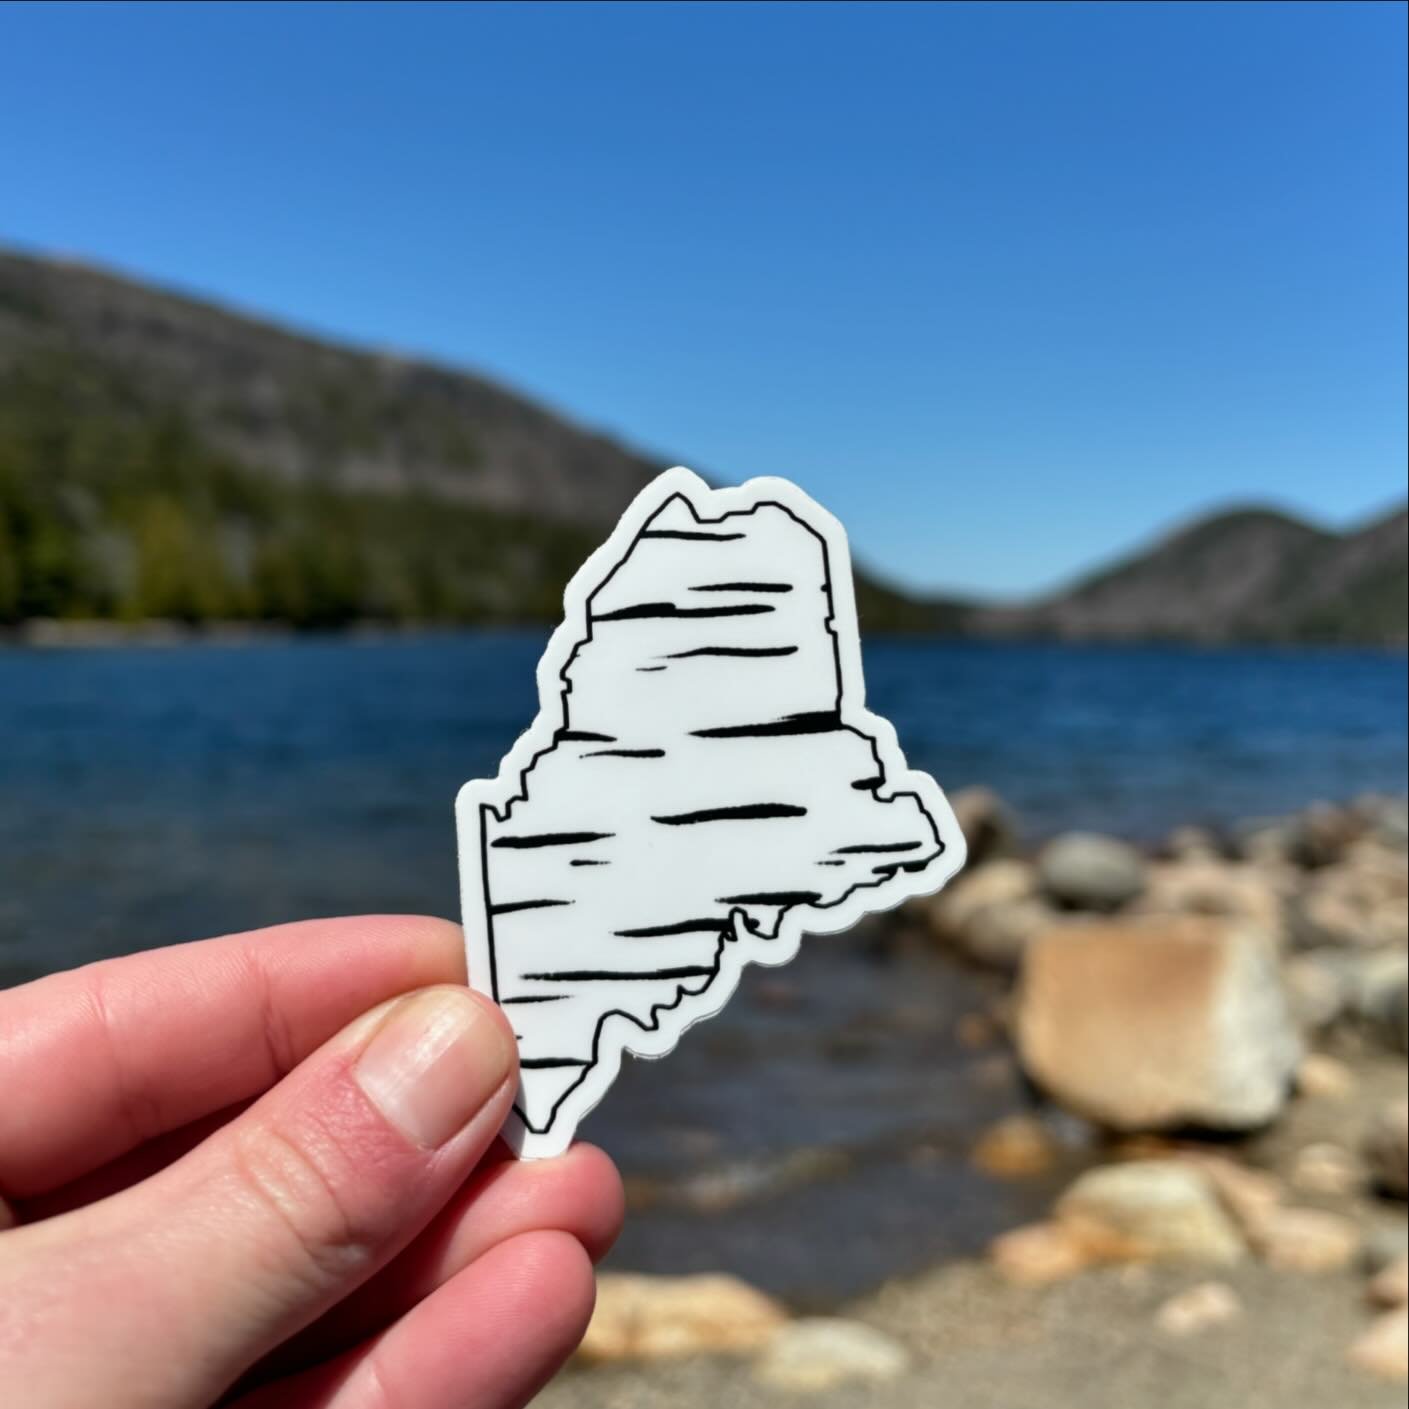 Our Birch Maine Stickers are right at home in Acadia 🙌🏼